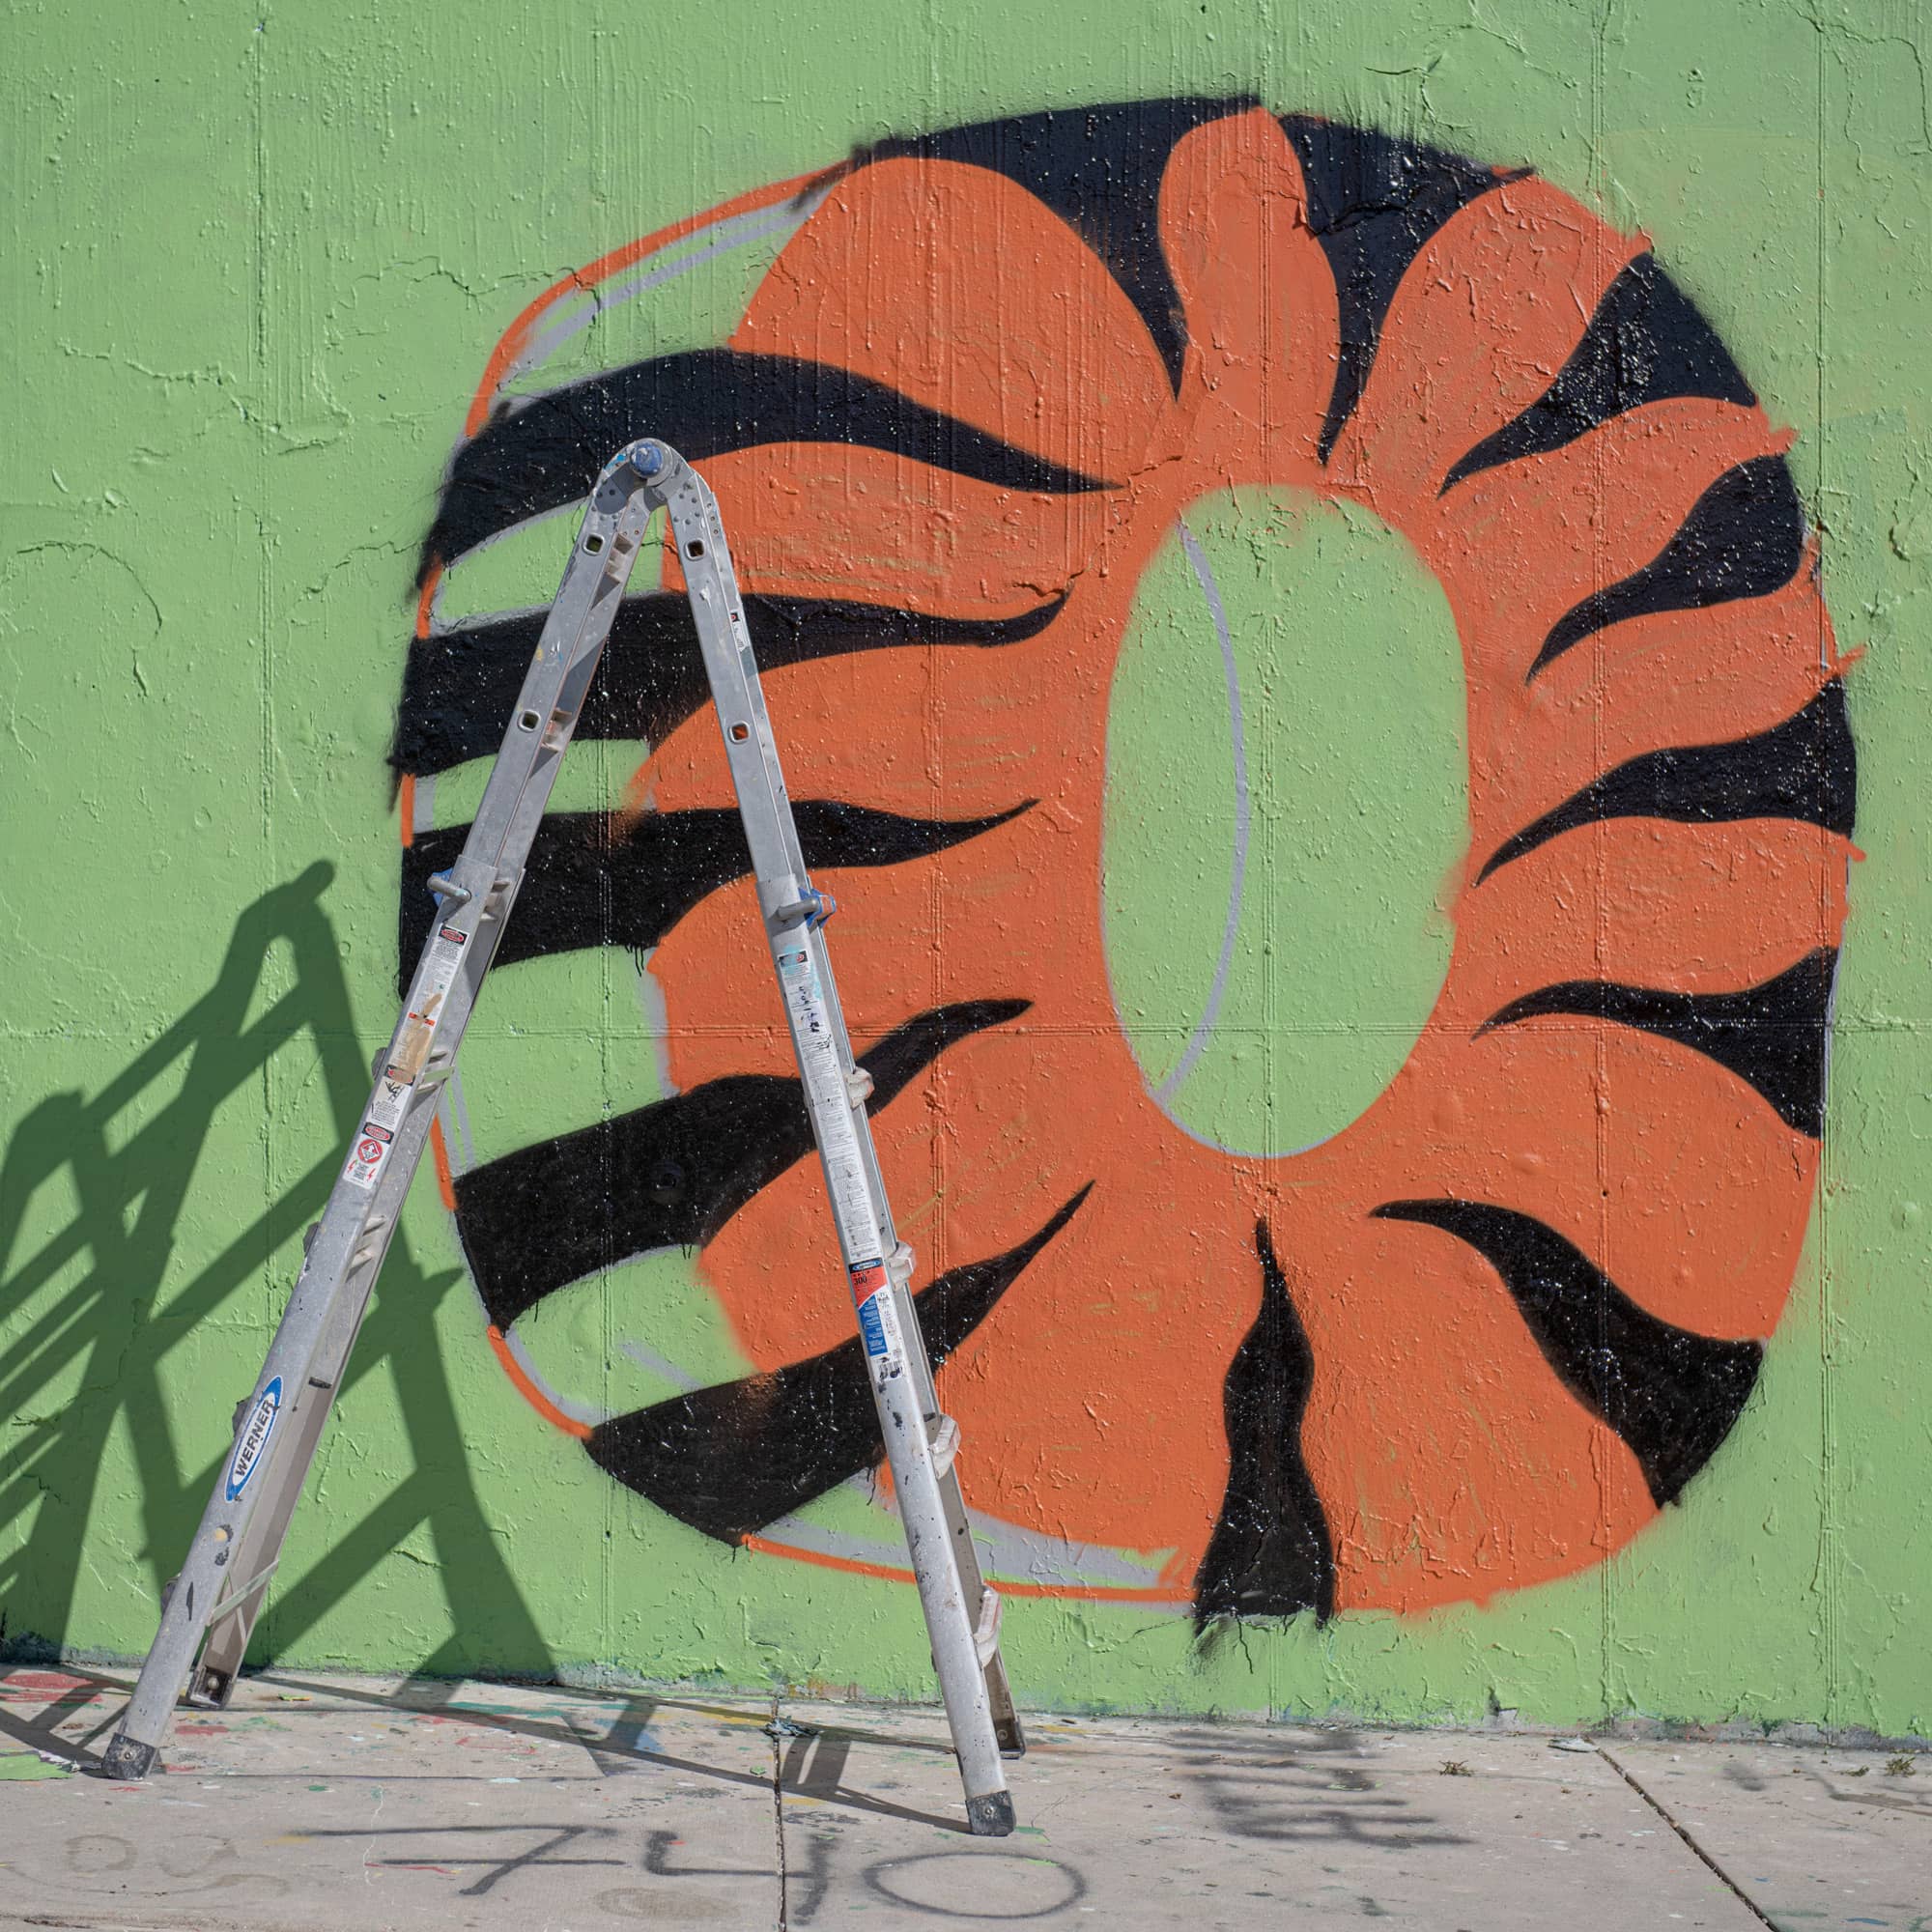 A mural in honor of Joe Burrow and the Cincinnati Bengals is in progress on the graffiti wall on the Ohio University campus.